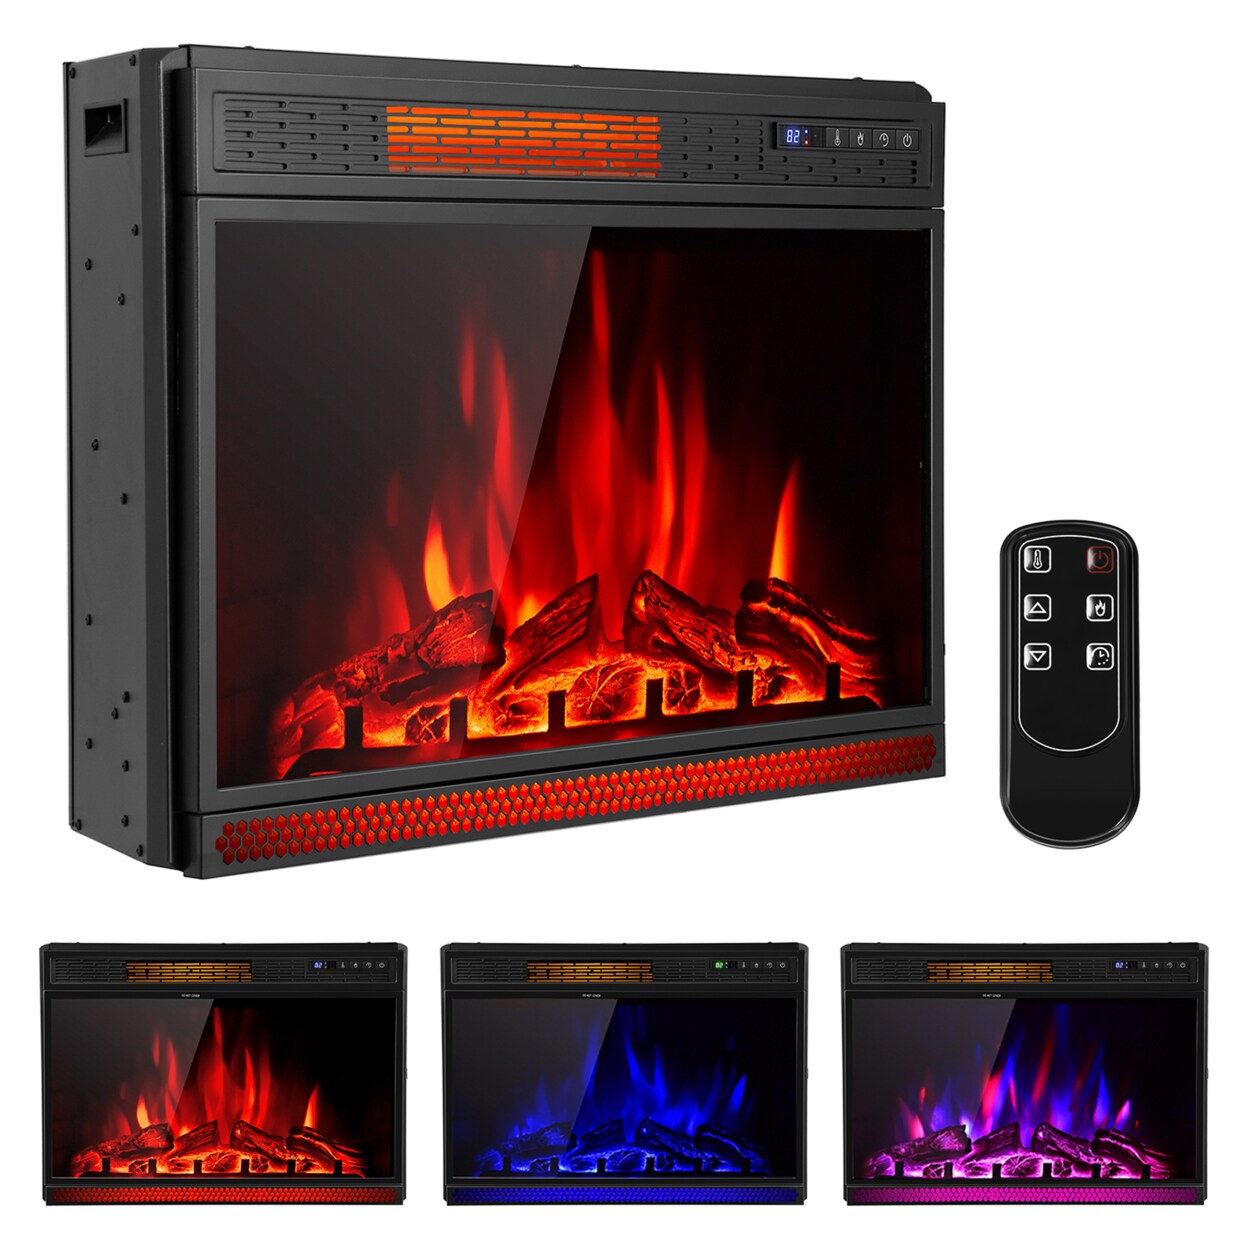 Gymax 28 Electric Fireplace Recessed 900/1350W Fireplace Heater w/ Remote Control